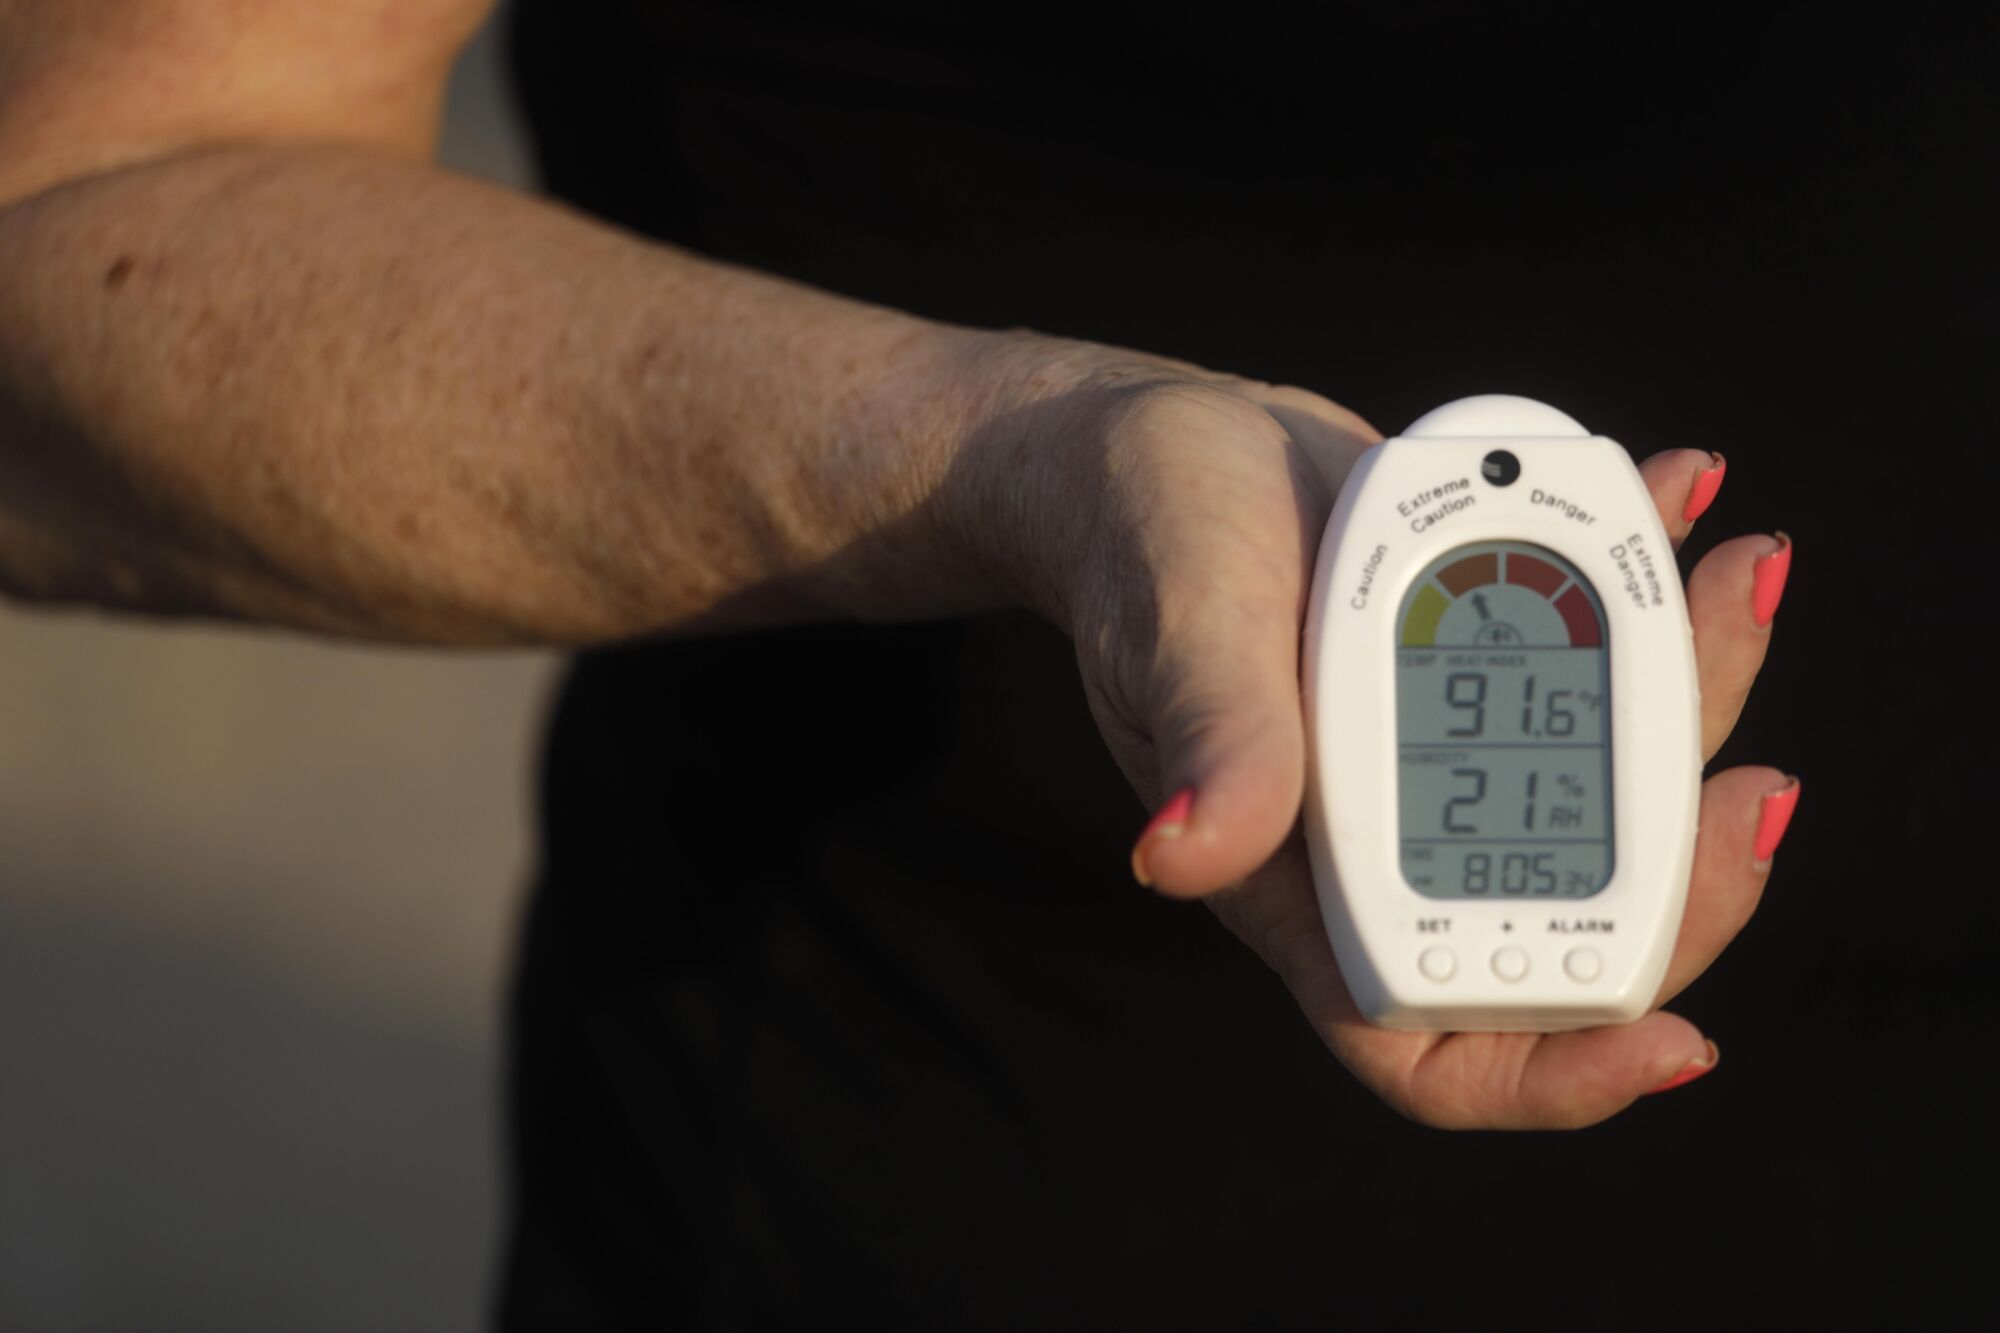 A woman's hand holds a thermometer with a display showing an outdoor reading of 91.6 degrees